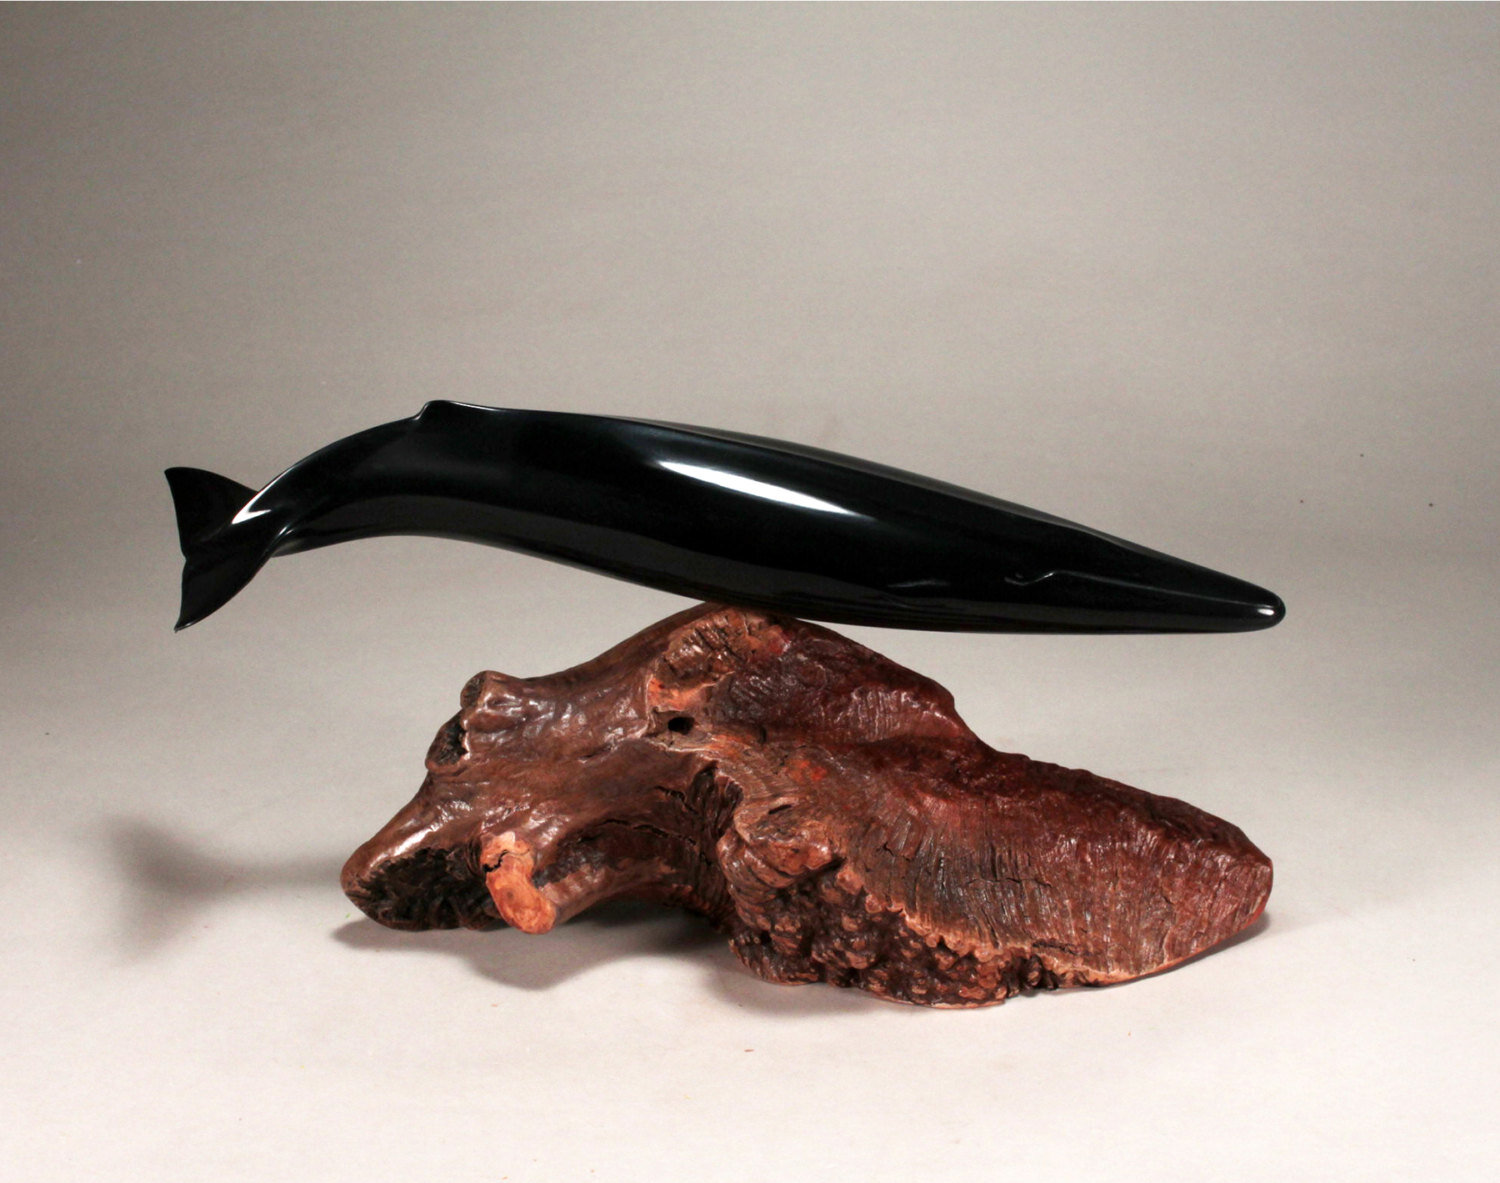 BOWHEAD WHALE Sculpture New direct from JOHN PERRY 5in Ebonite Figurine Decor 